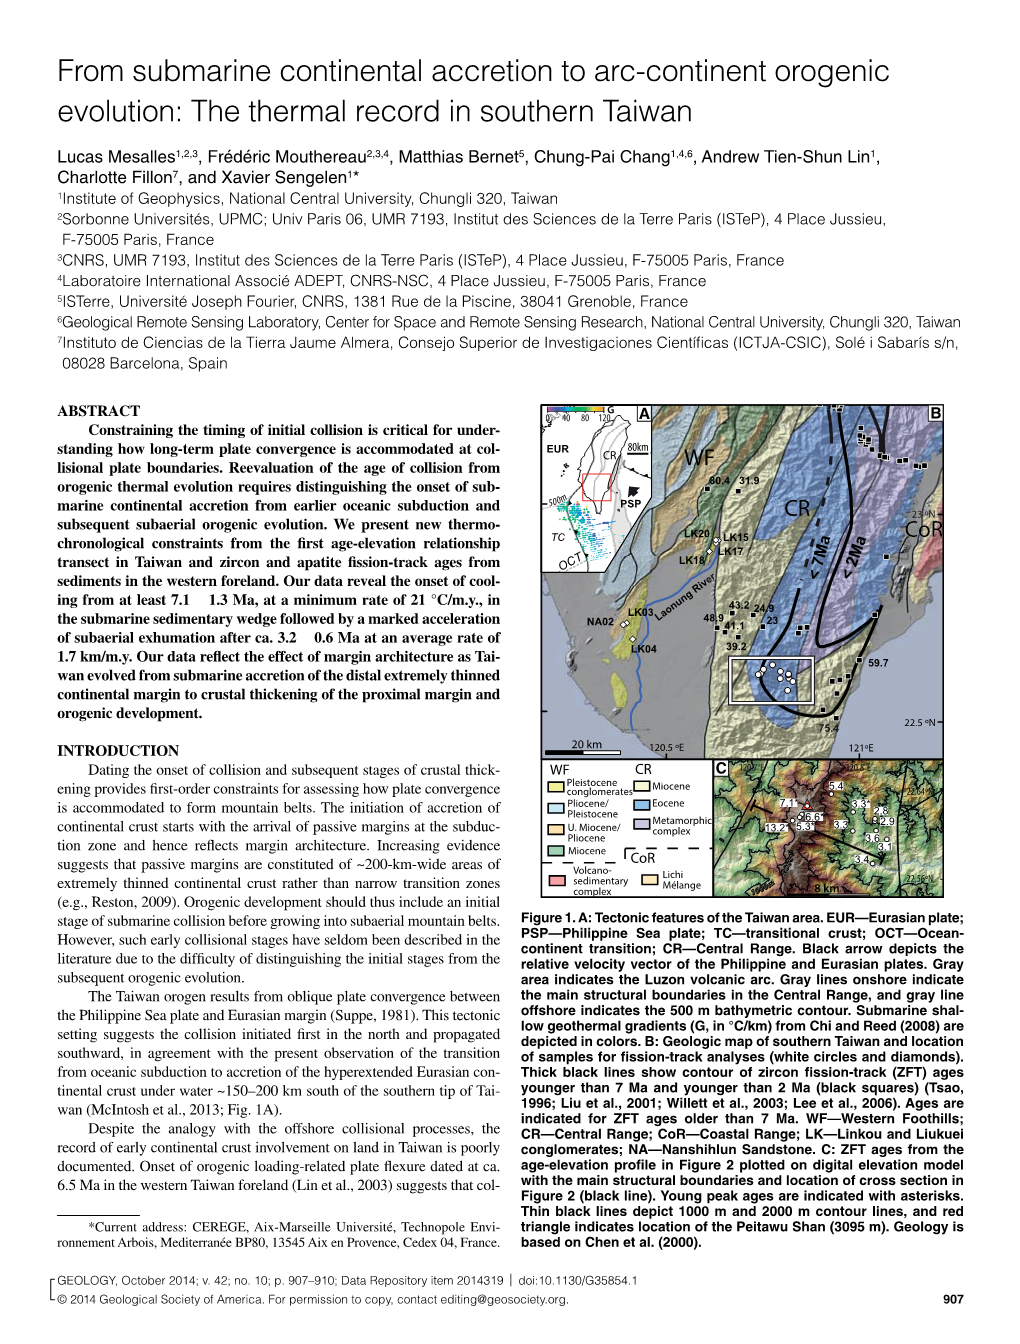 From Submarine Continental Accretion to Arc-Continent Orogenic Evolution: the Thermal Record in Southern Taiwan